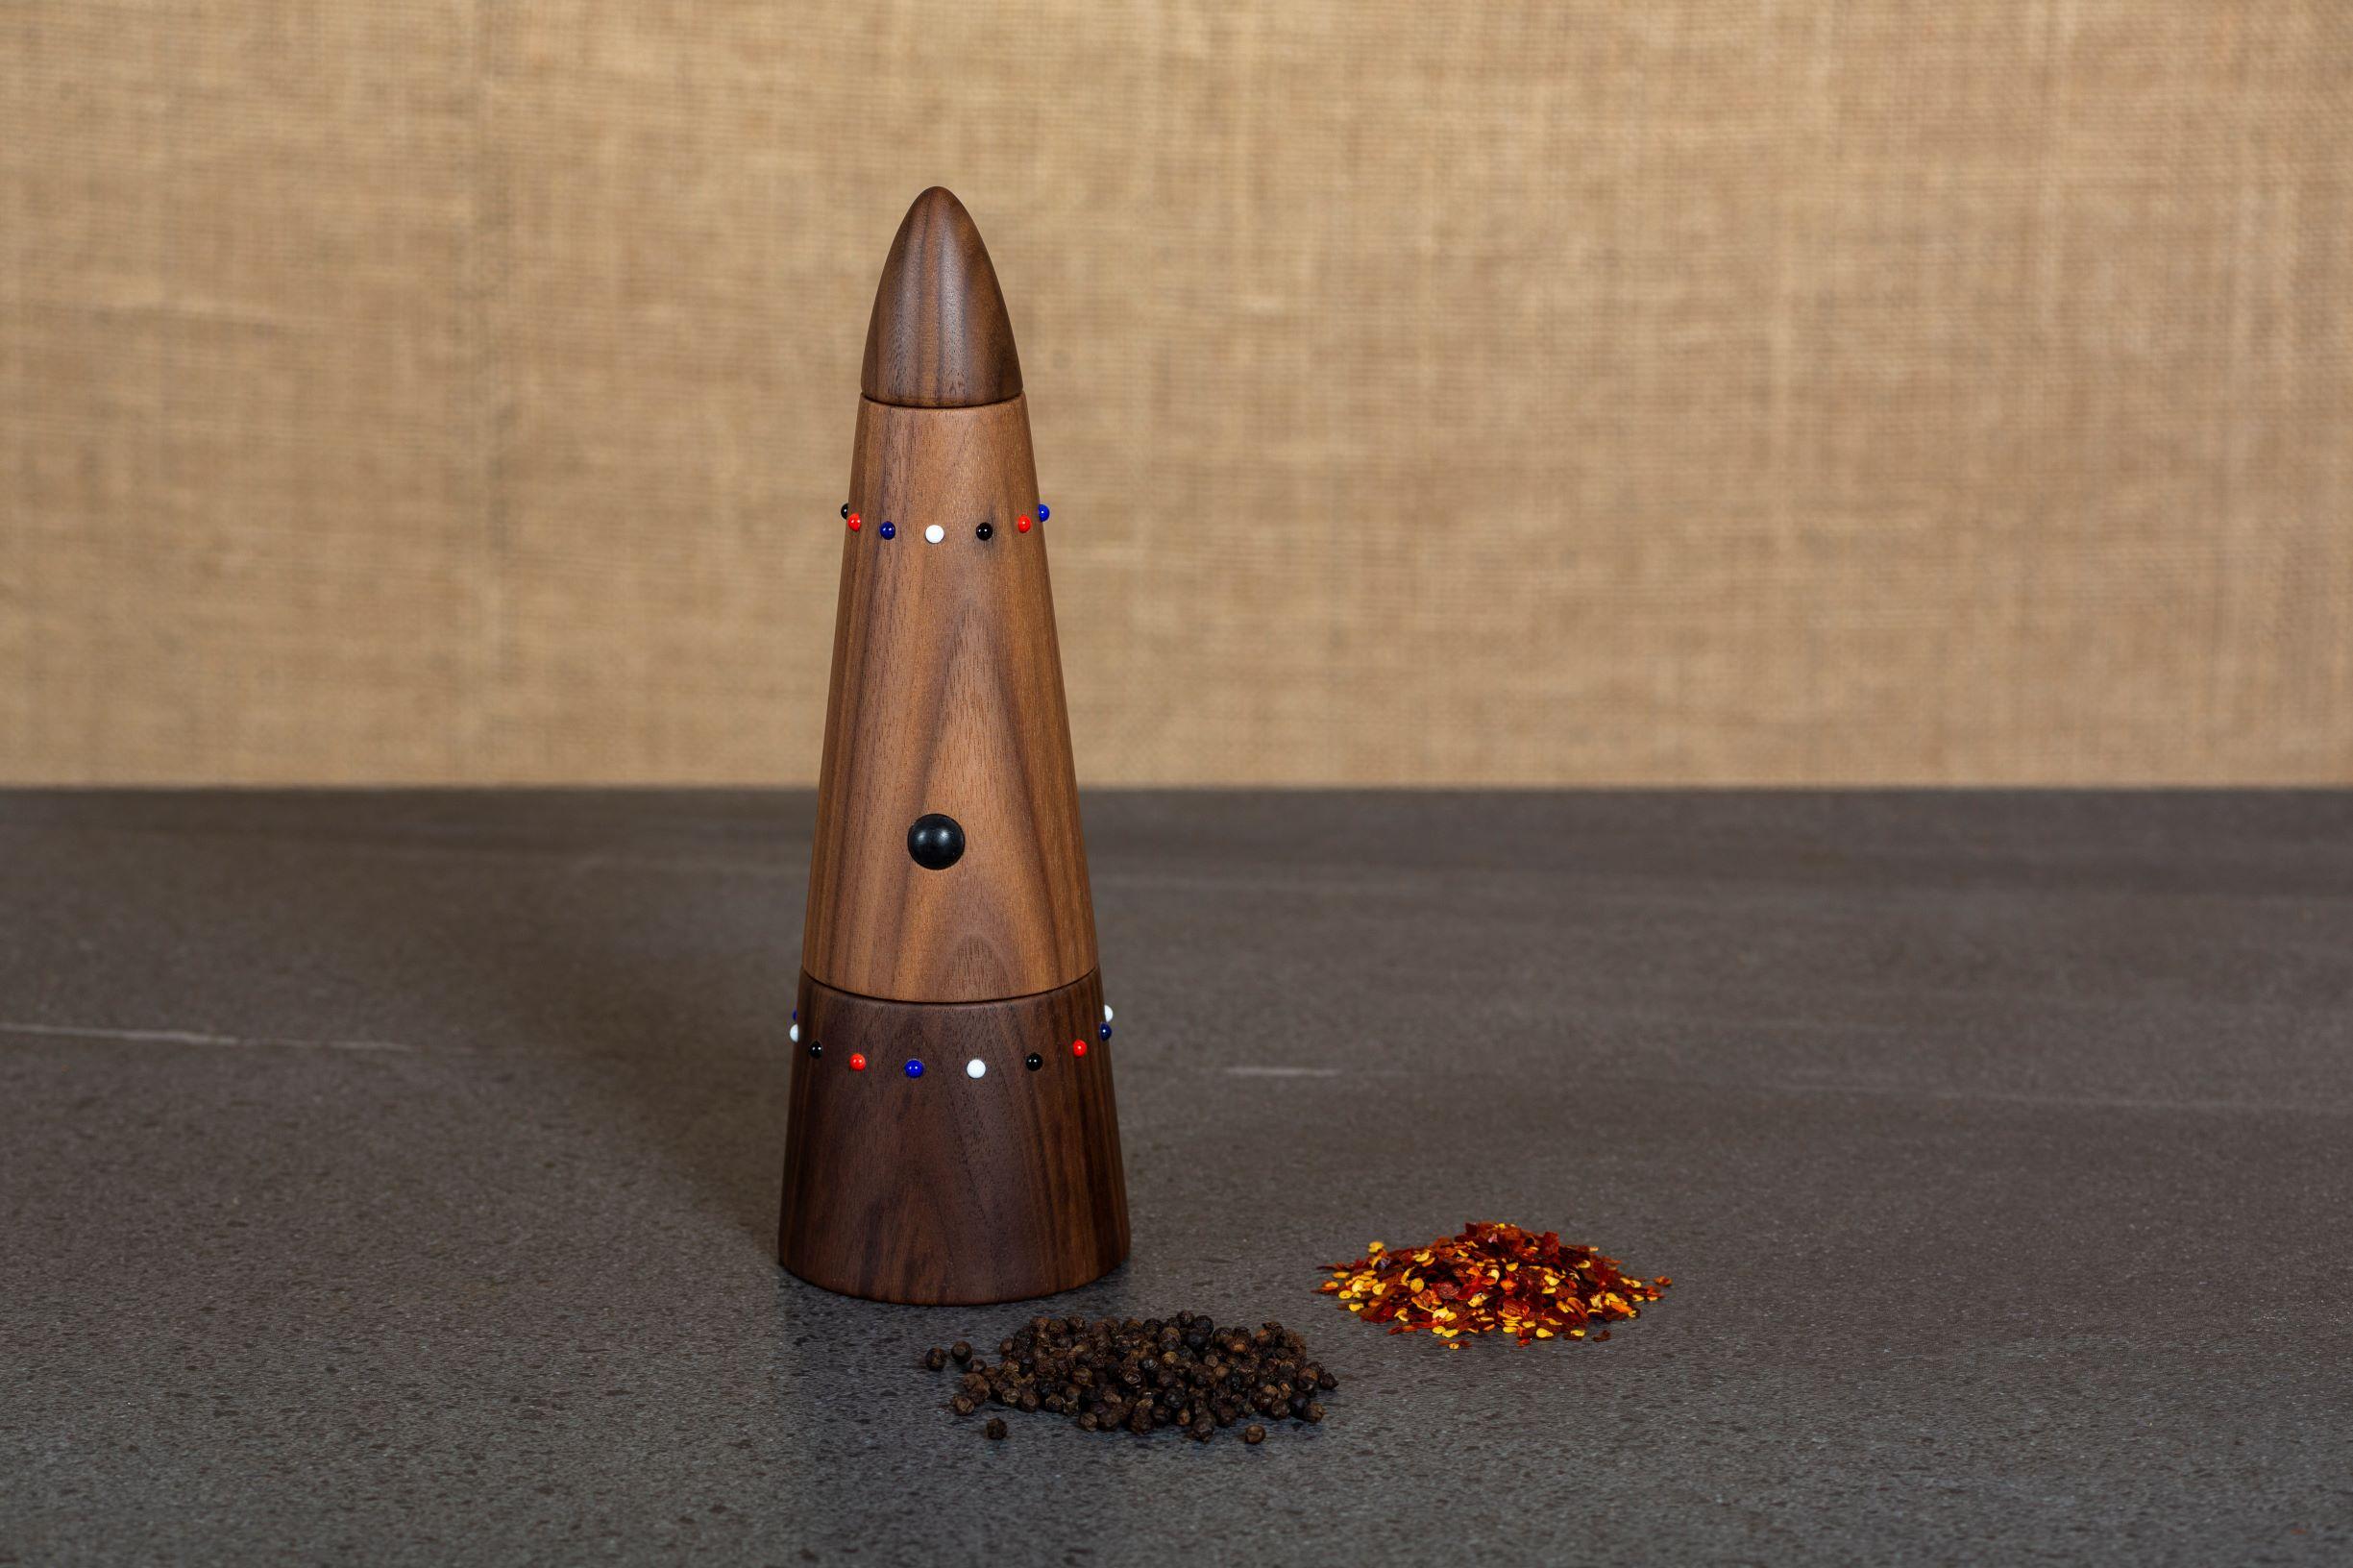 The SoShiro Pok collection pepper grinder is crafted from walnut wood, embedded with glass pearl beads, and fitted with all-ceramic, non-oxidizing or corroding grinding mechanisms offering 14 granular size settings. 

The Pok collection celebrates